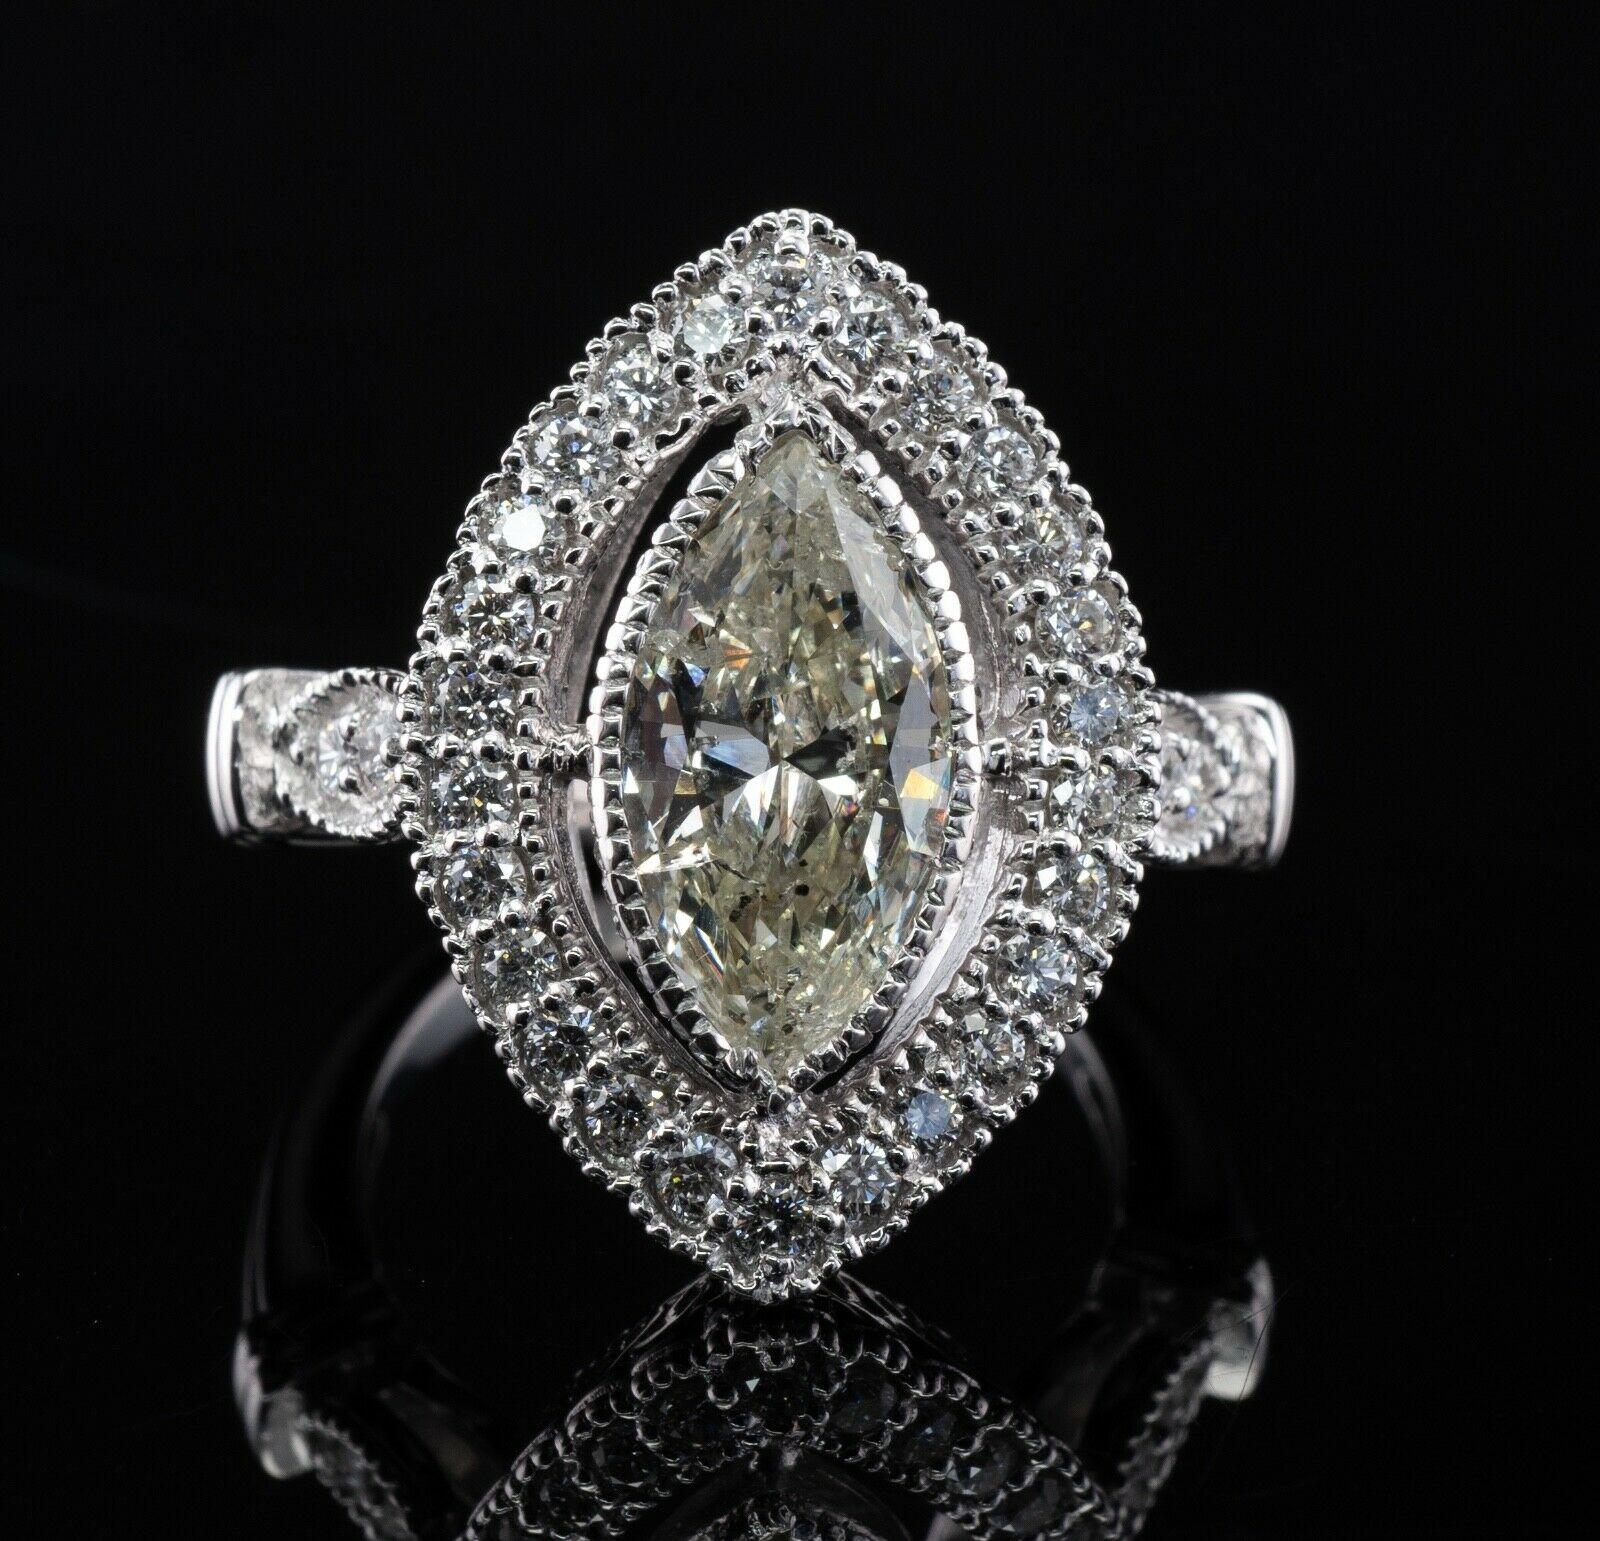 This amazing estate ring is finely crafted in solid 18K White Gold. Hallmarked Del Co. The center marquise cut diamond is 2.50 carats of I-2 clarity and K color. 26 surrounding round brilliant cut diamonds and 4 side diamonds are VS1 clarity and G